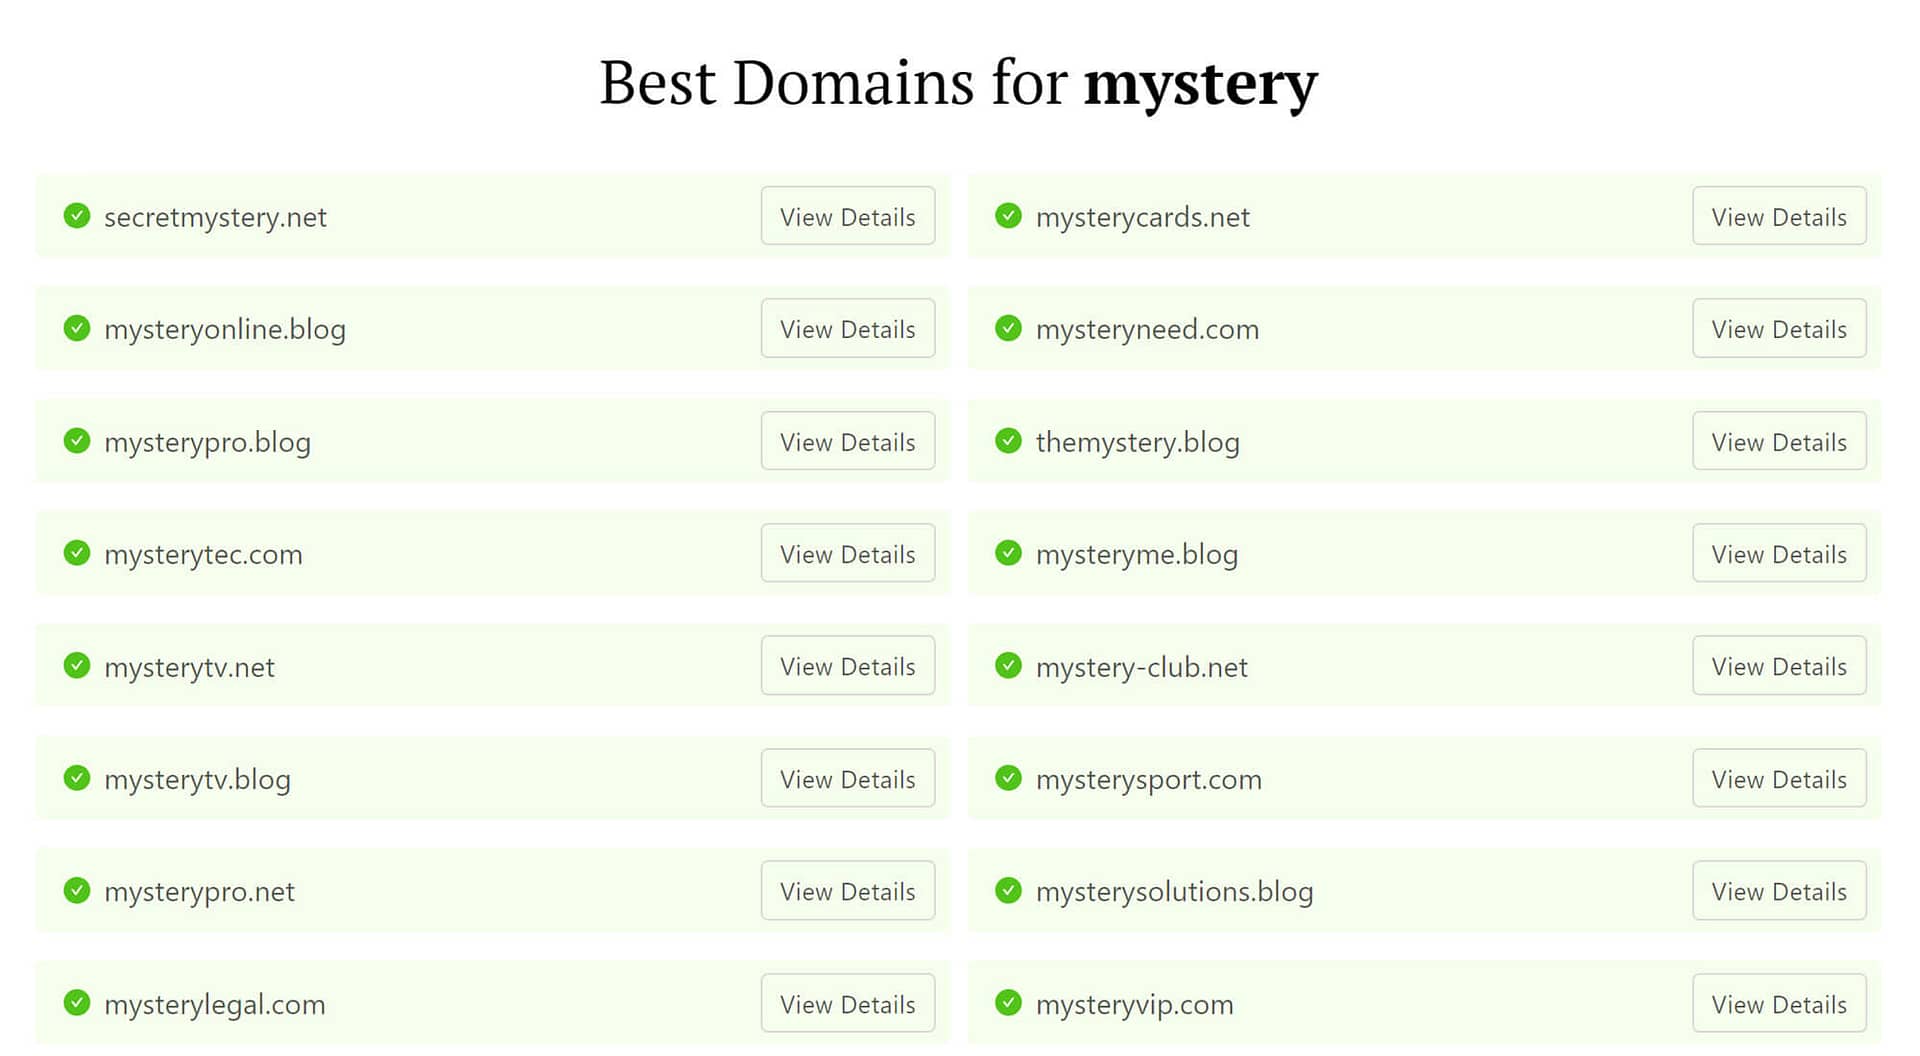 DomainWheel Pen Name Generator  search results for "mystery"